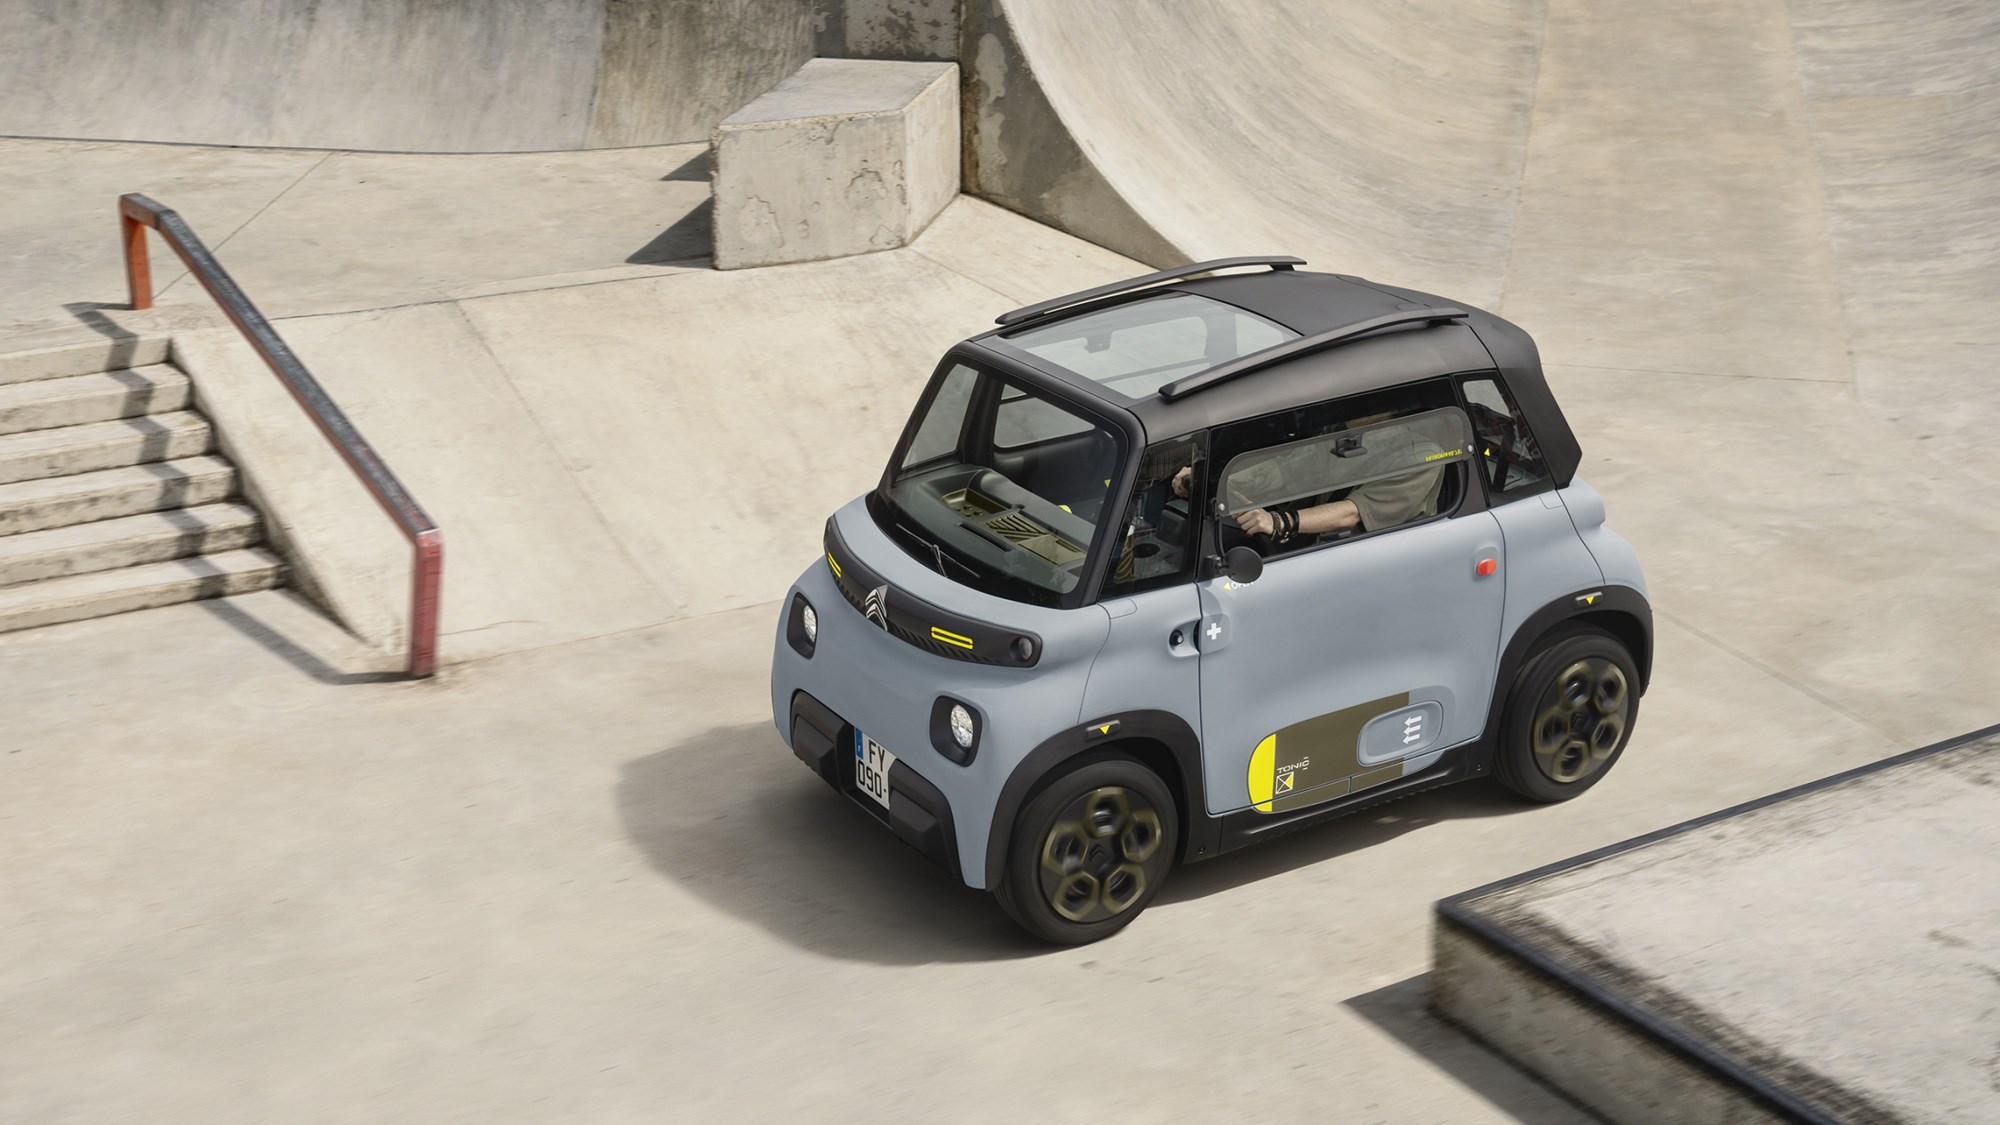 France's Citroën will rent its Ami two-seat electric car for less